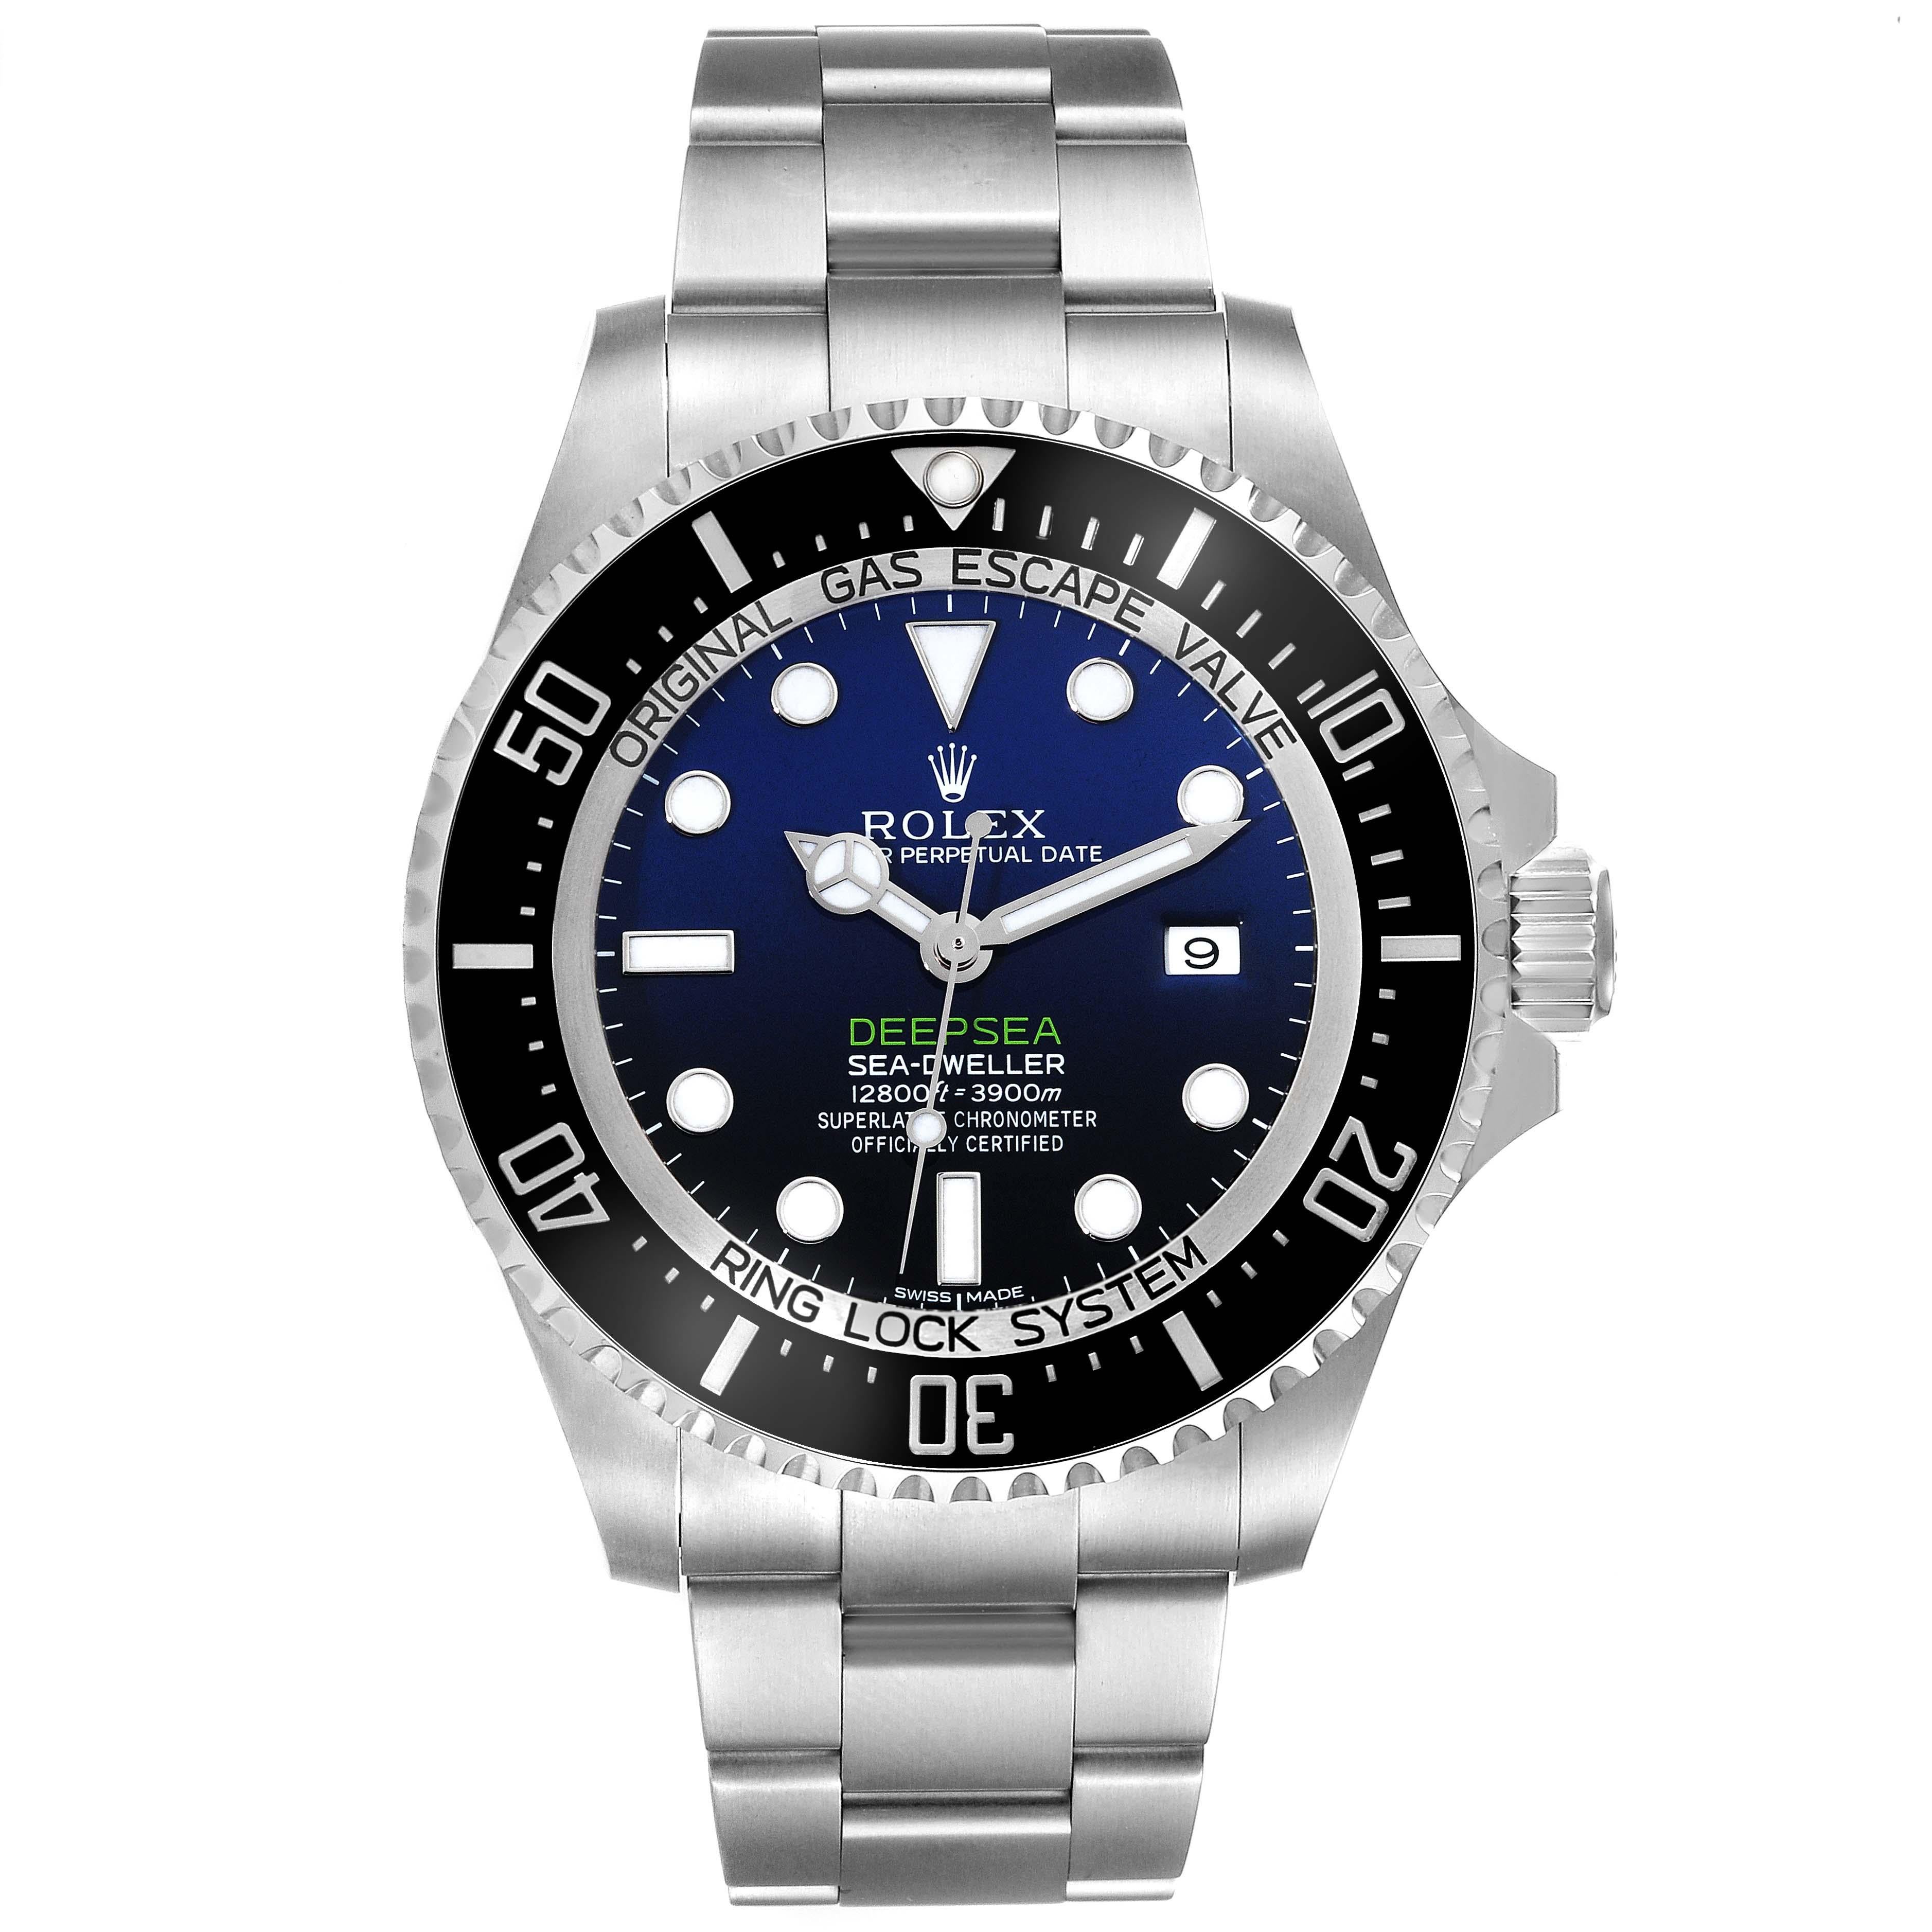 Rolex Seadweller Deepsea Cameron D-Blue Steel Mens Watch 116660 Box Card. Officially certified chronometer automatic self-winding movement. Stainless steel oyster case 44.0 mm in diameter. Rolex logo on a crown. Special time-lapse unidirectional